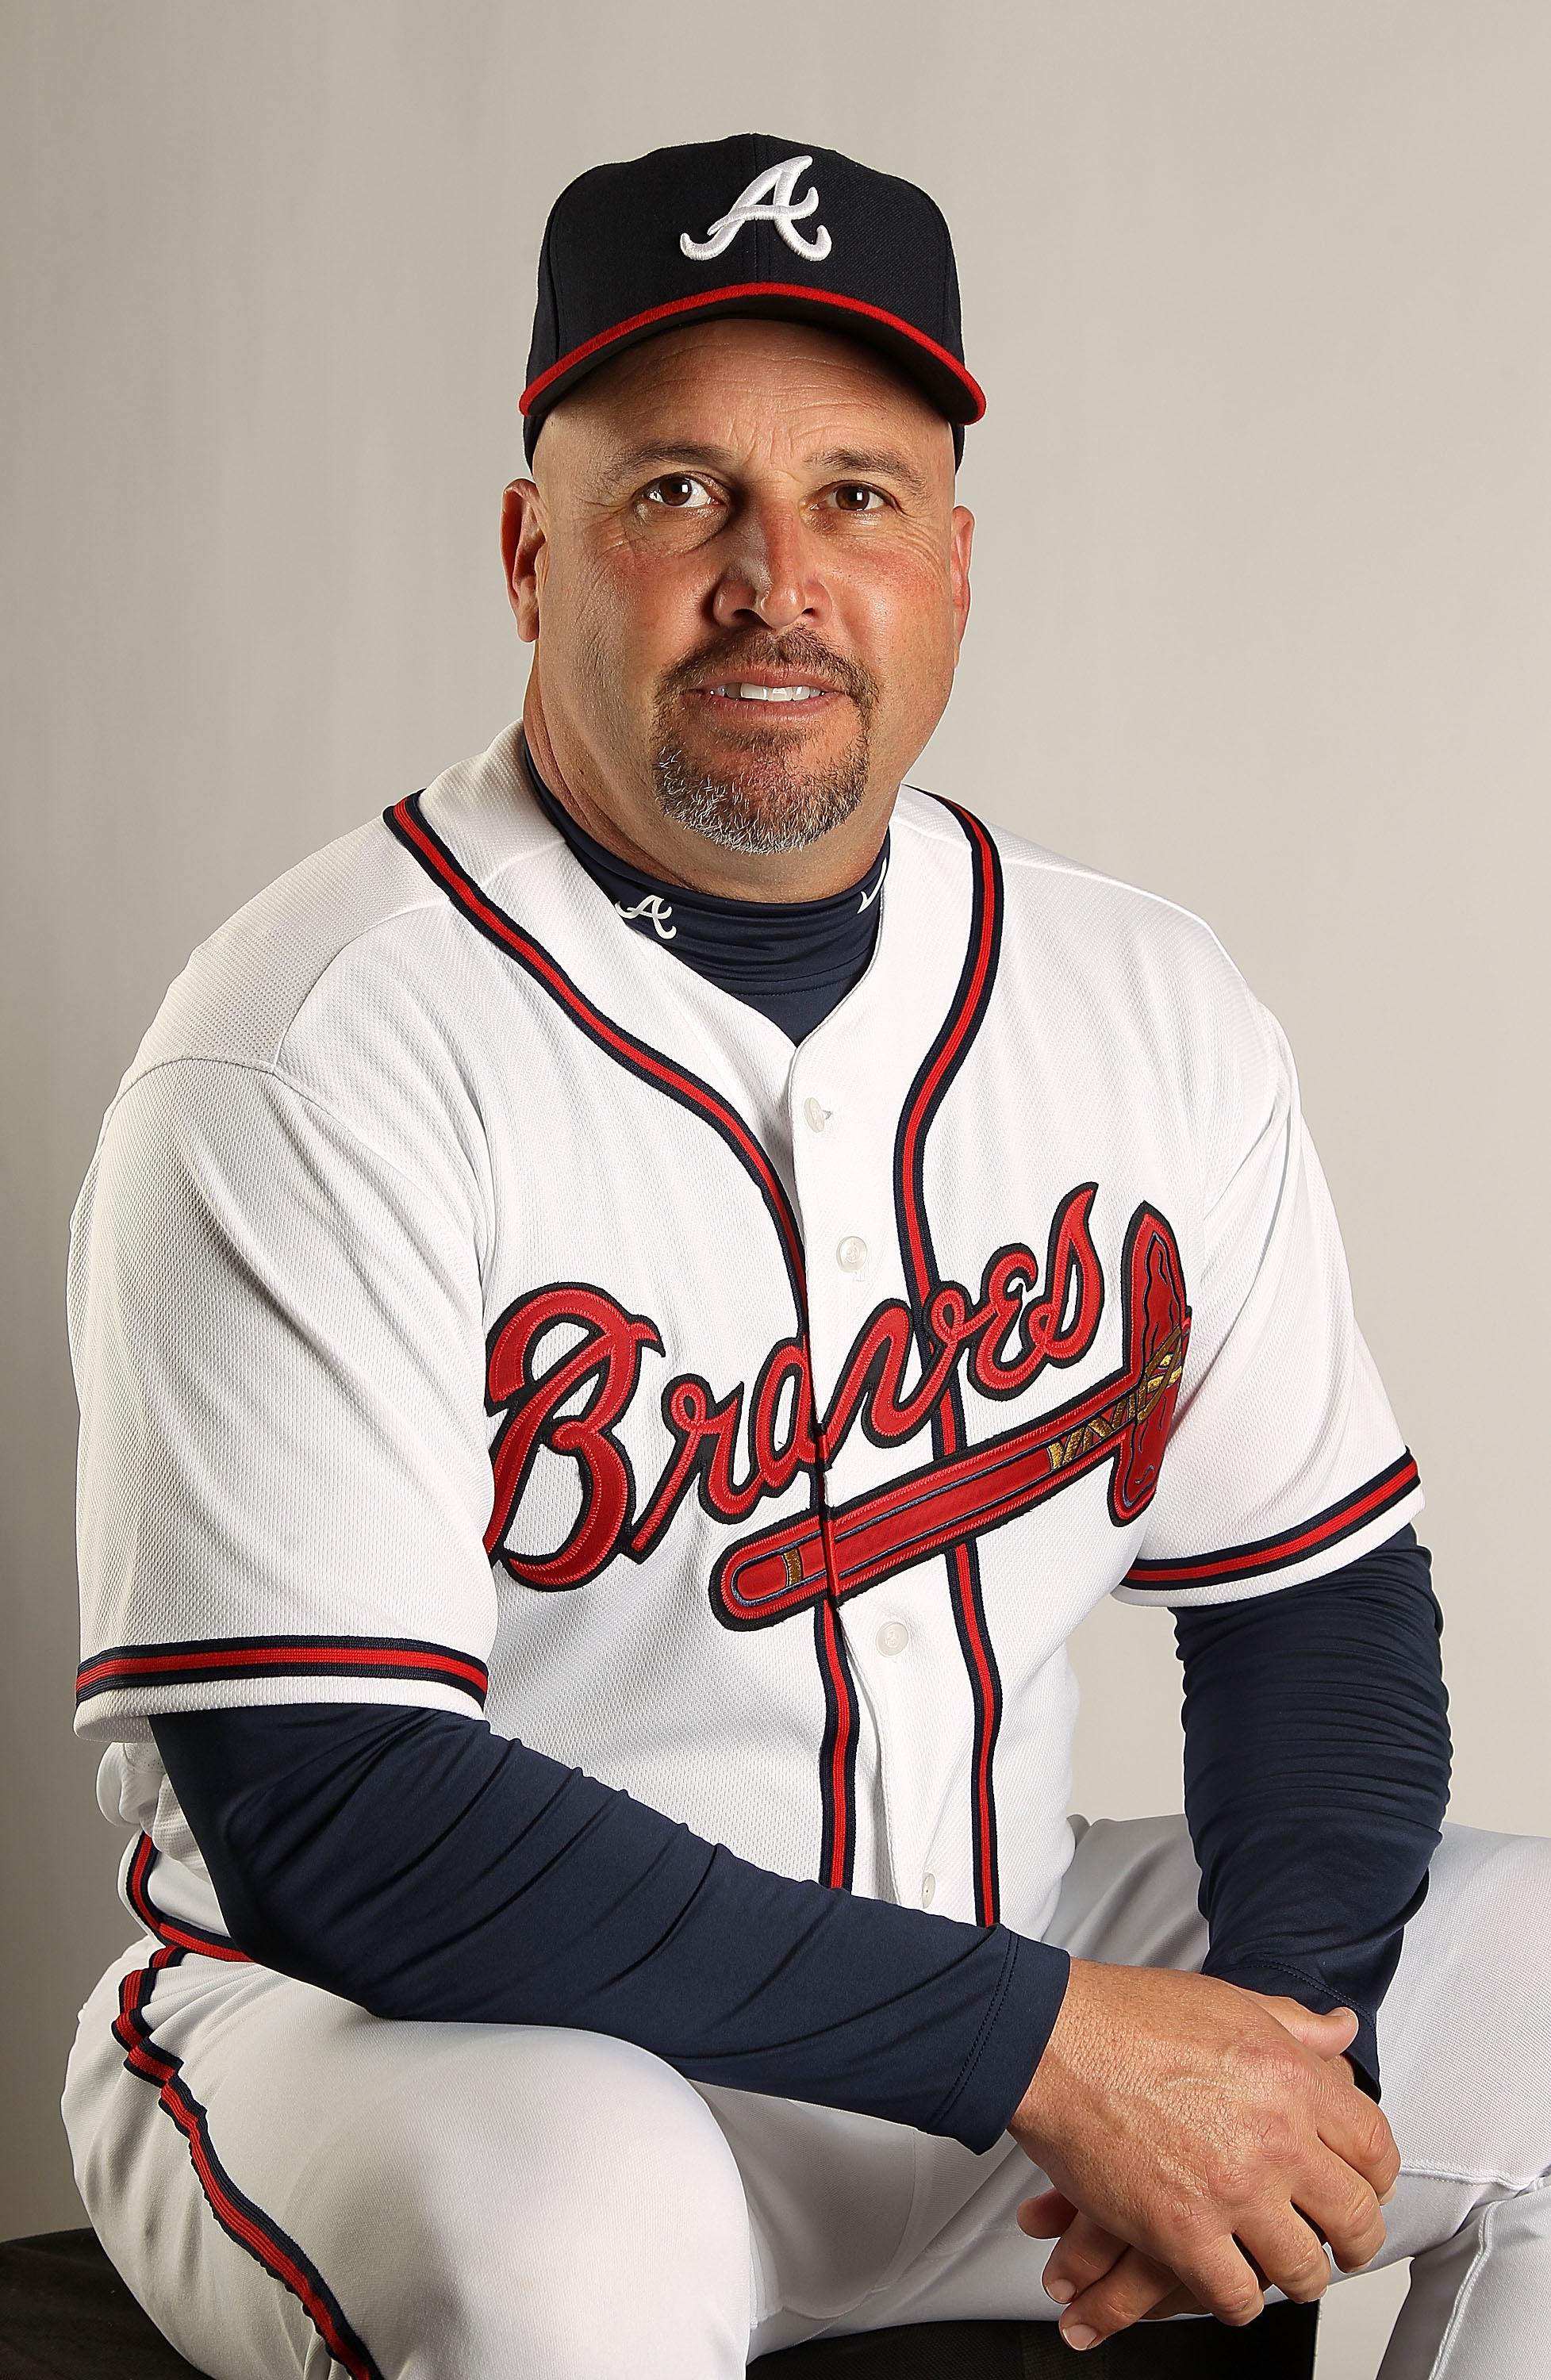 LAKE BUENA VISTA, FL - FEBRUARY 21: Manager Fredi Gonzalez #33 of the Atlanta Braves during Photo Day at  Champion Stadium at ESPN Wide World of Sports of Complex on February 21, 2011 in Lake Buena Vista, Florida.  (Photo by Mike Ehrmann/Getty Images)